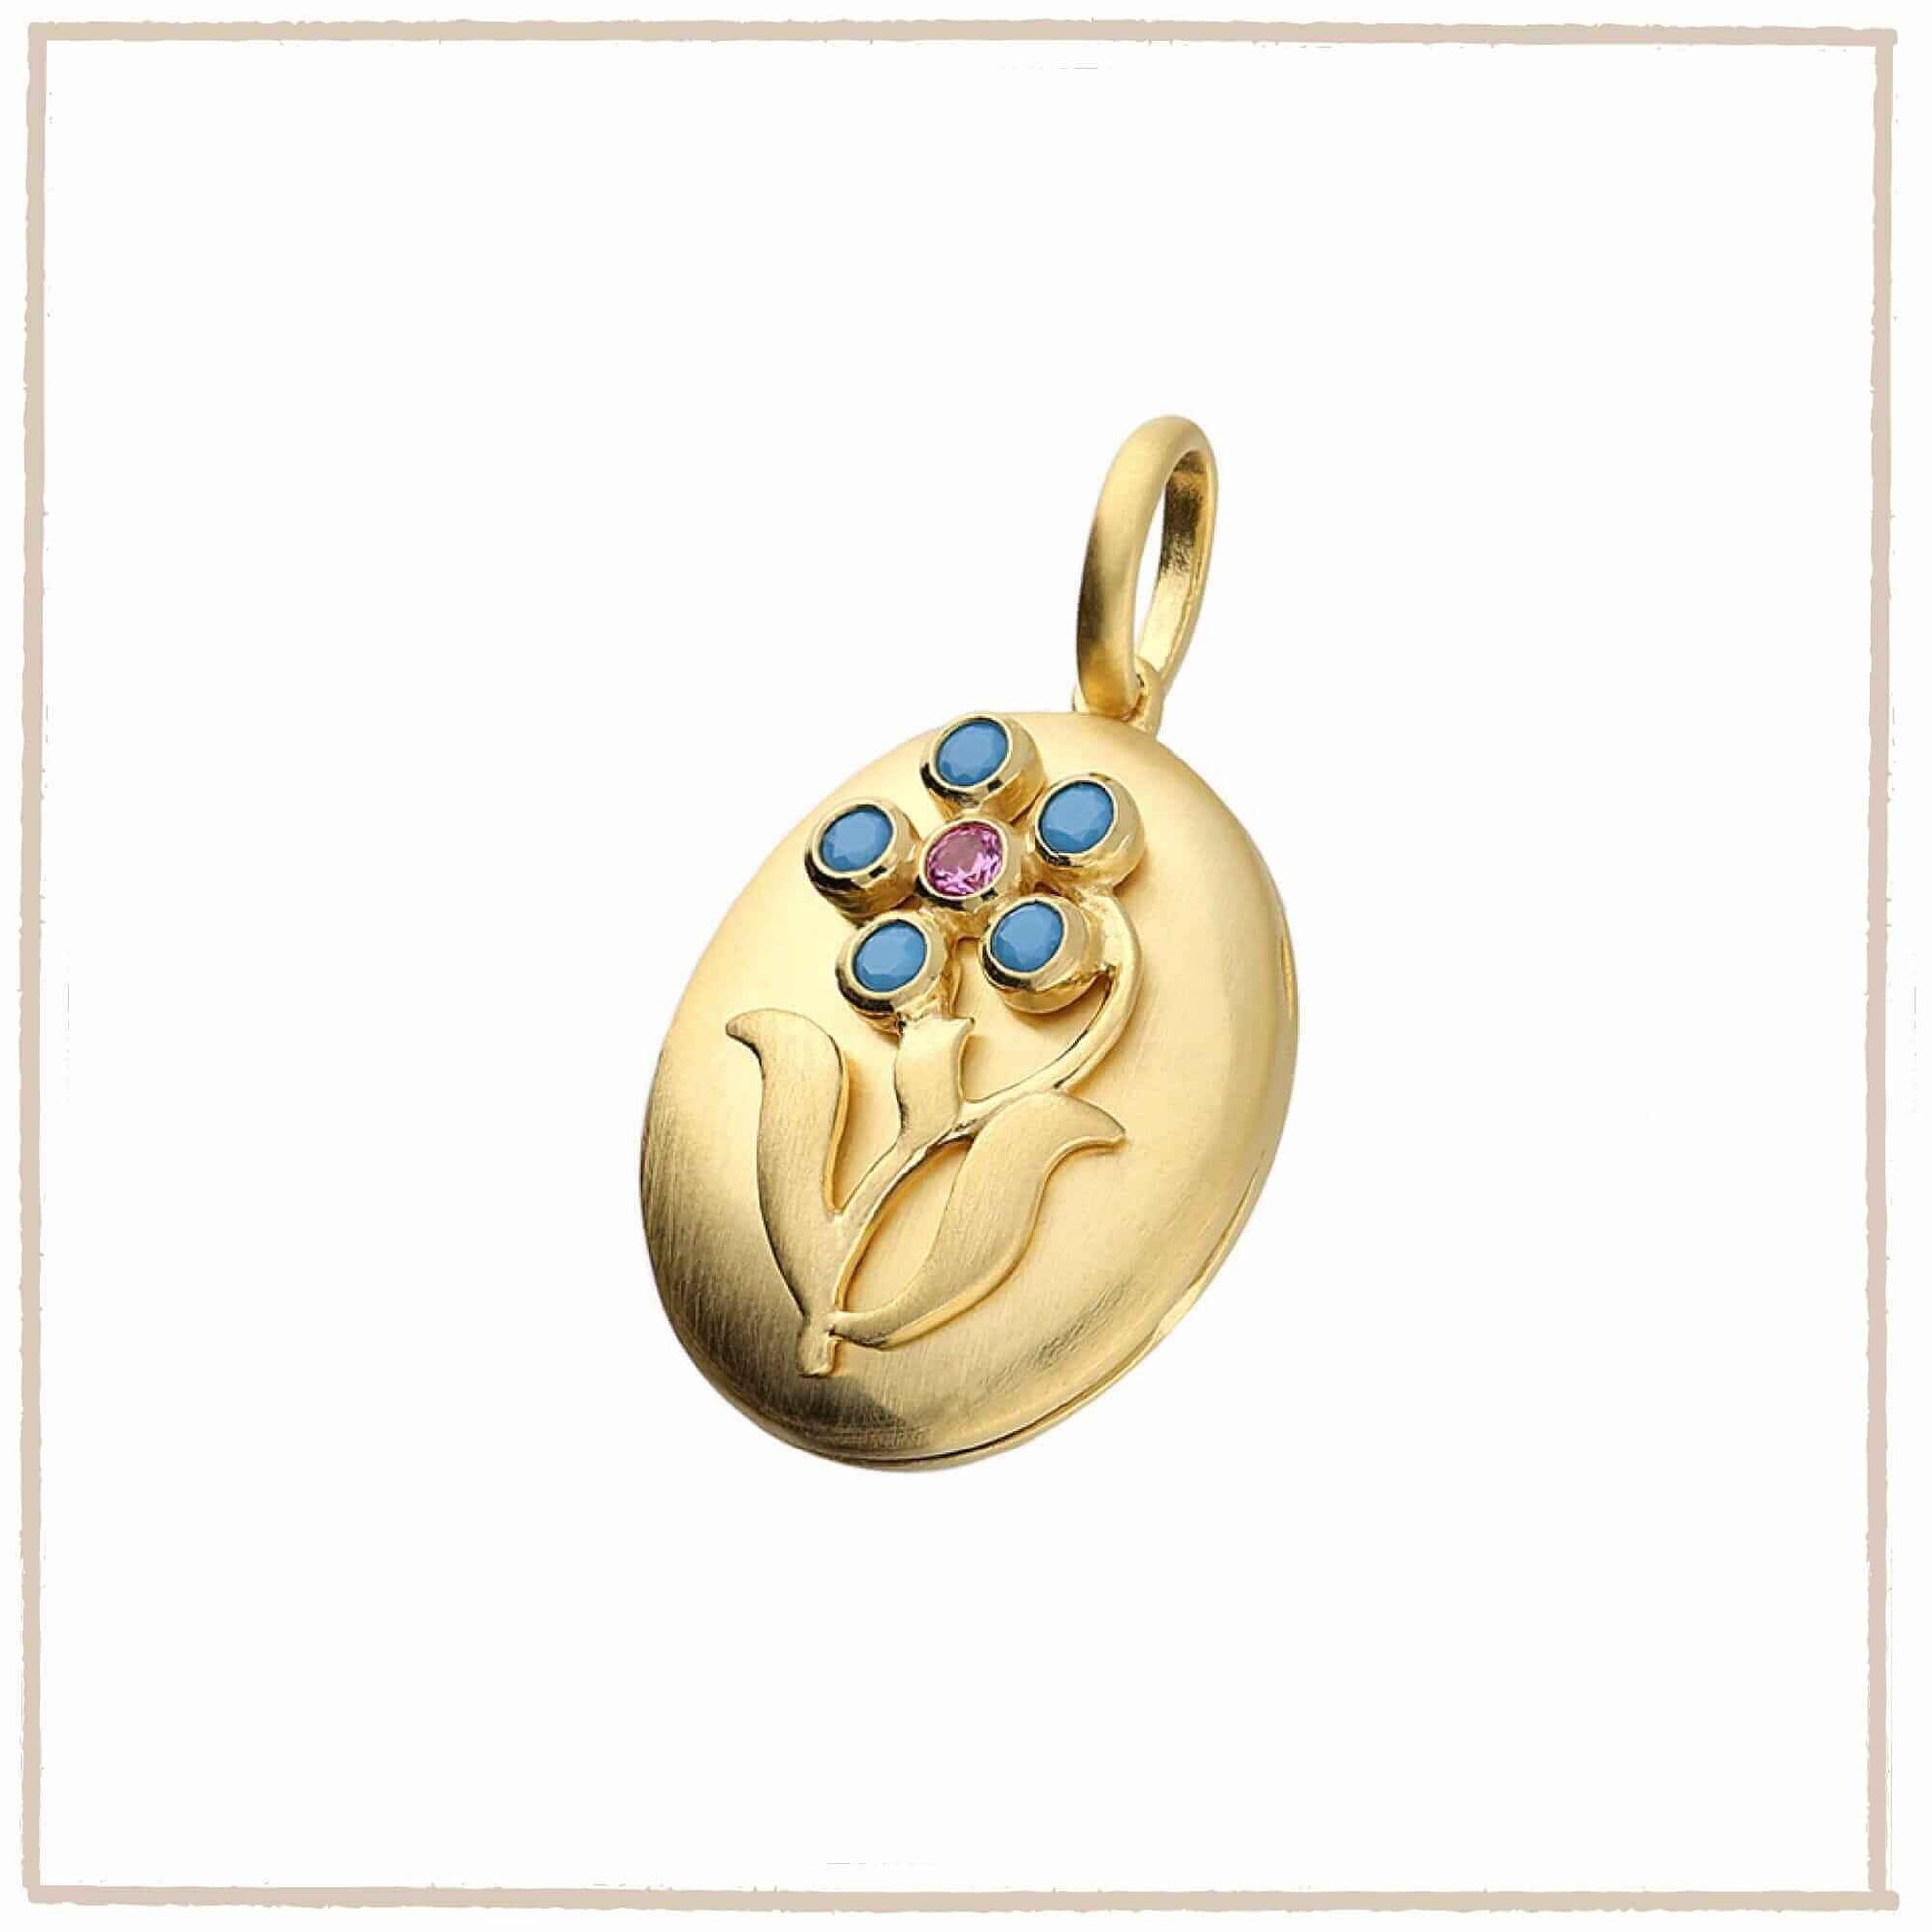 Arts & Crafts Style Forget Me Not Flower Locket With 18 ct Gold & Turquoise in Sterling Silver - Twelve Silver Trees